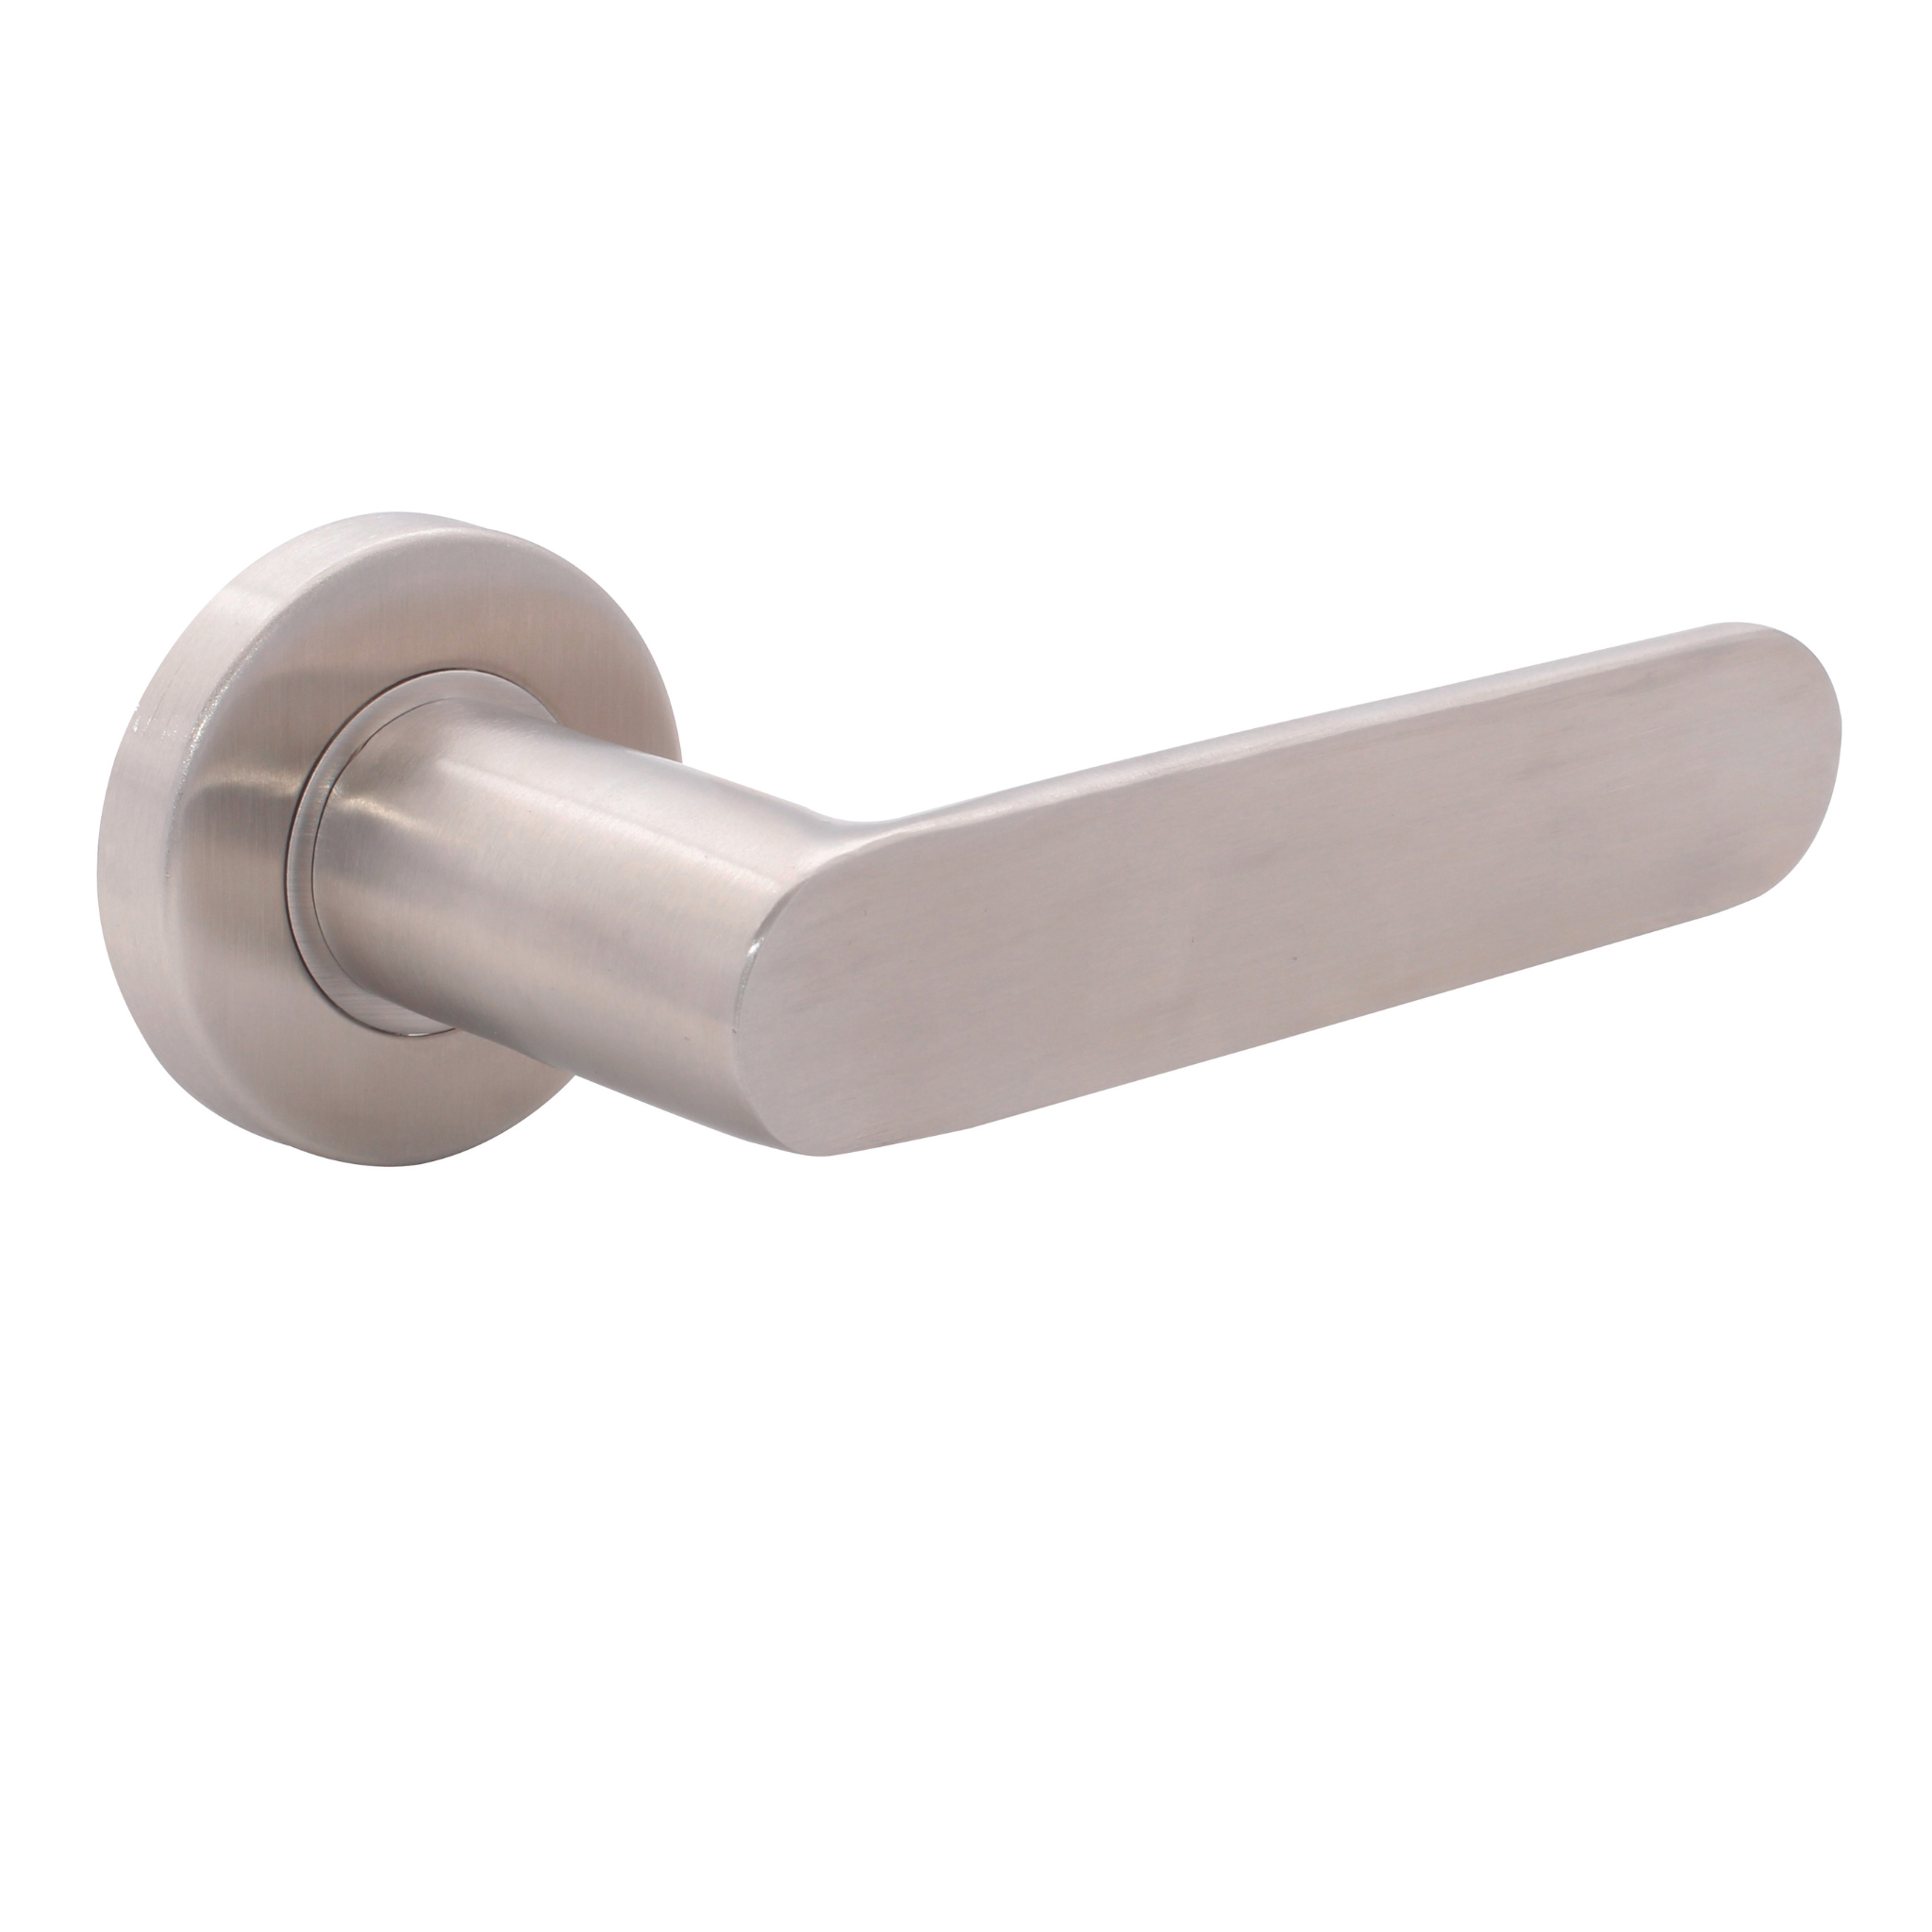 FS203.R._.SS, Lever Handles, Form, On Round Rose, With Escutcheons, Stainless Steel, CISA